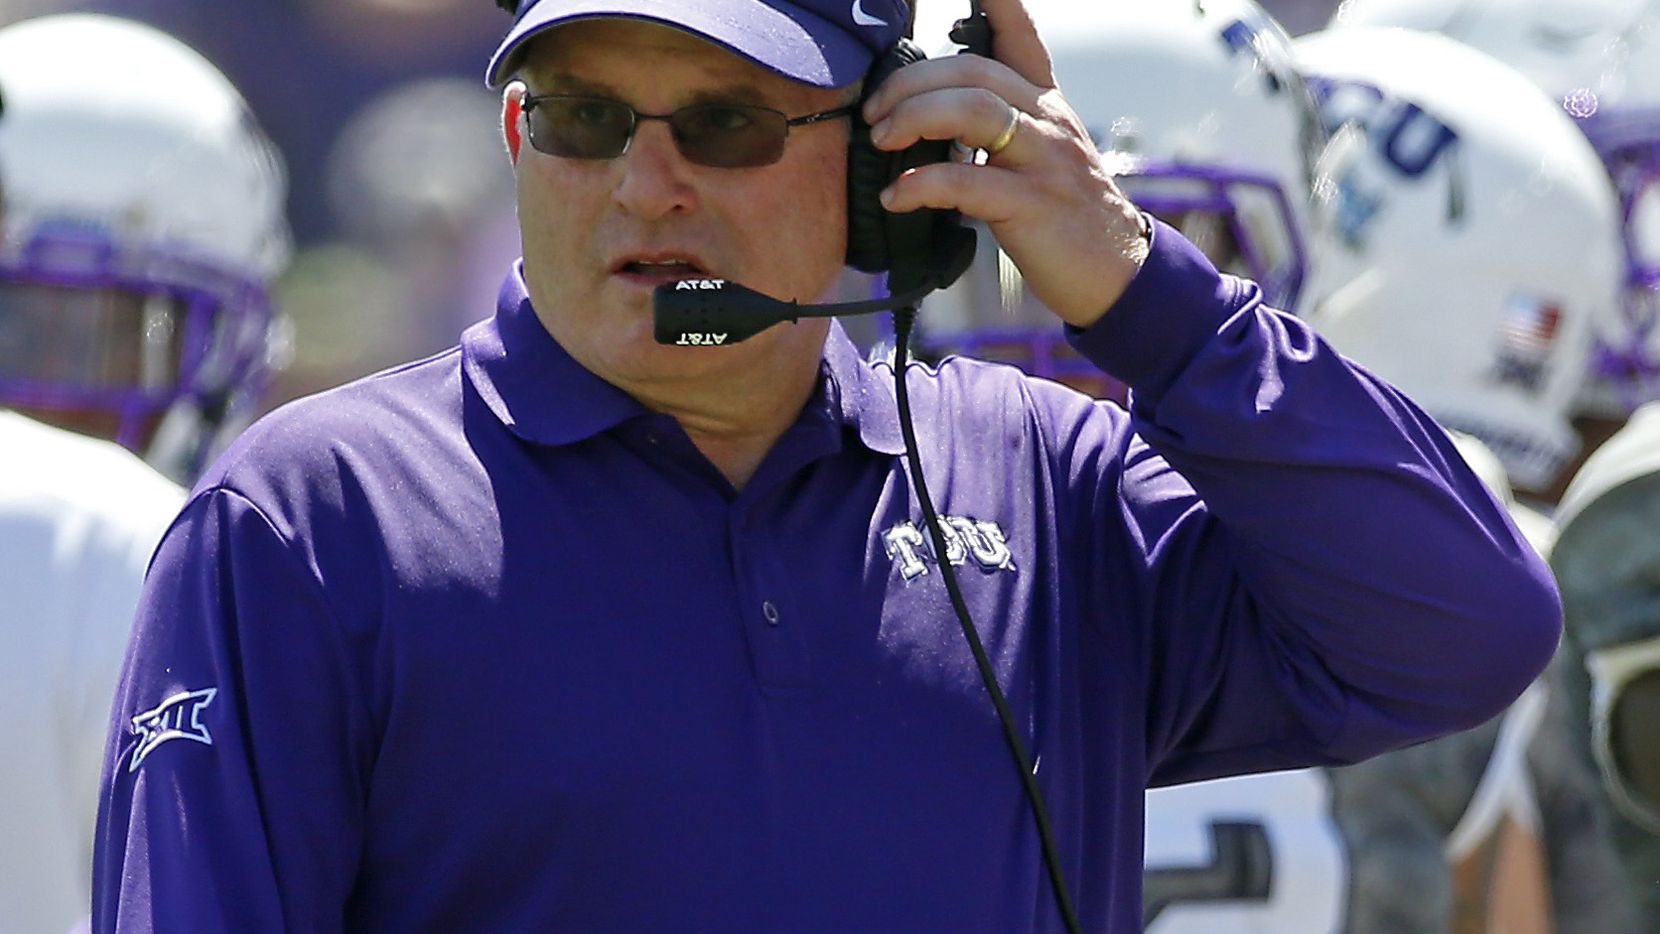 TCU head coach Gary Patterson watches from the sideline during the second quarter against Iowa State at Amon G. Carter Stadium in Fort Worth, Texas, Saturday, Sept. 17, 2016. (Jae S. Lee/The Dallas Morning News)